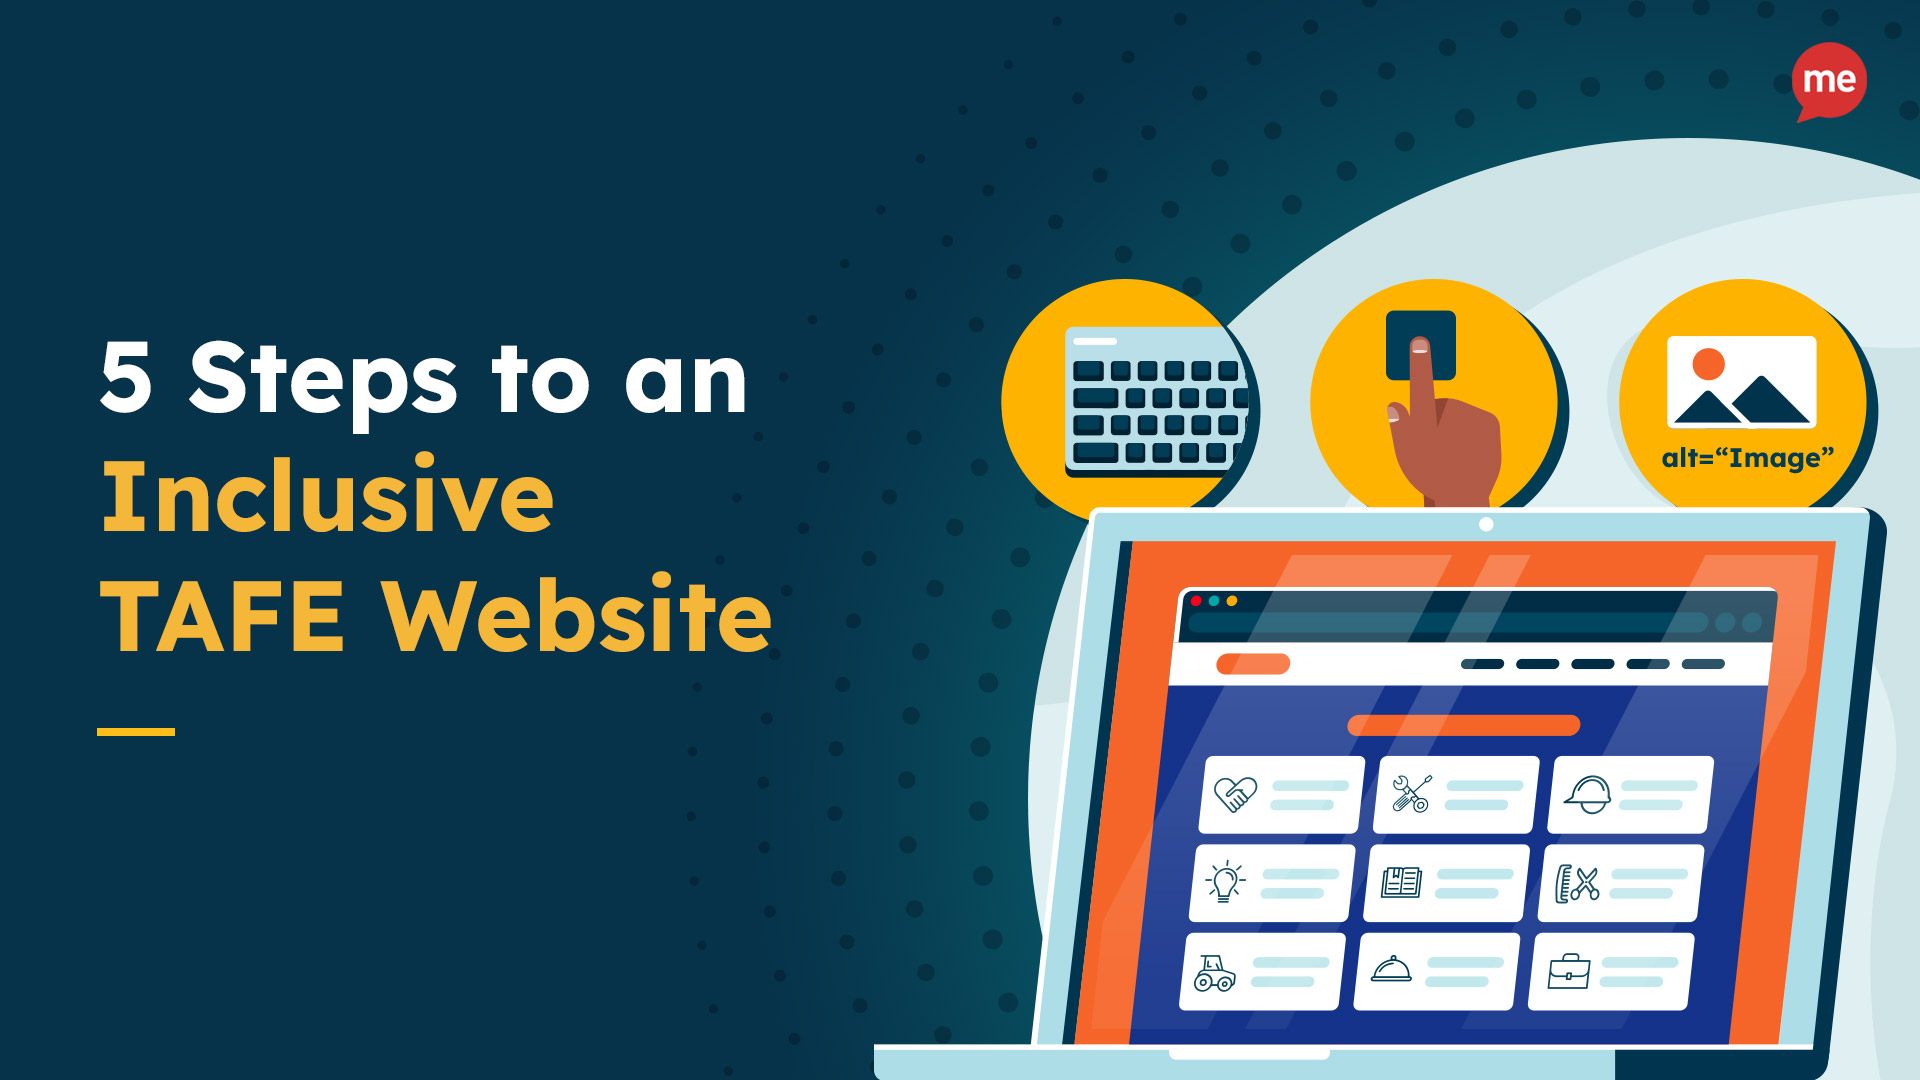 5 Steps to an Inclusive TAFE website